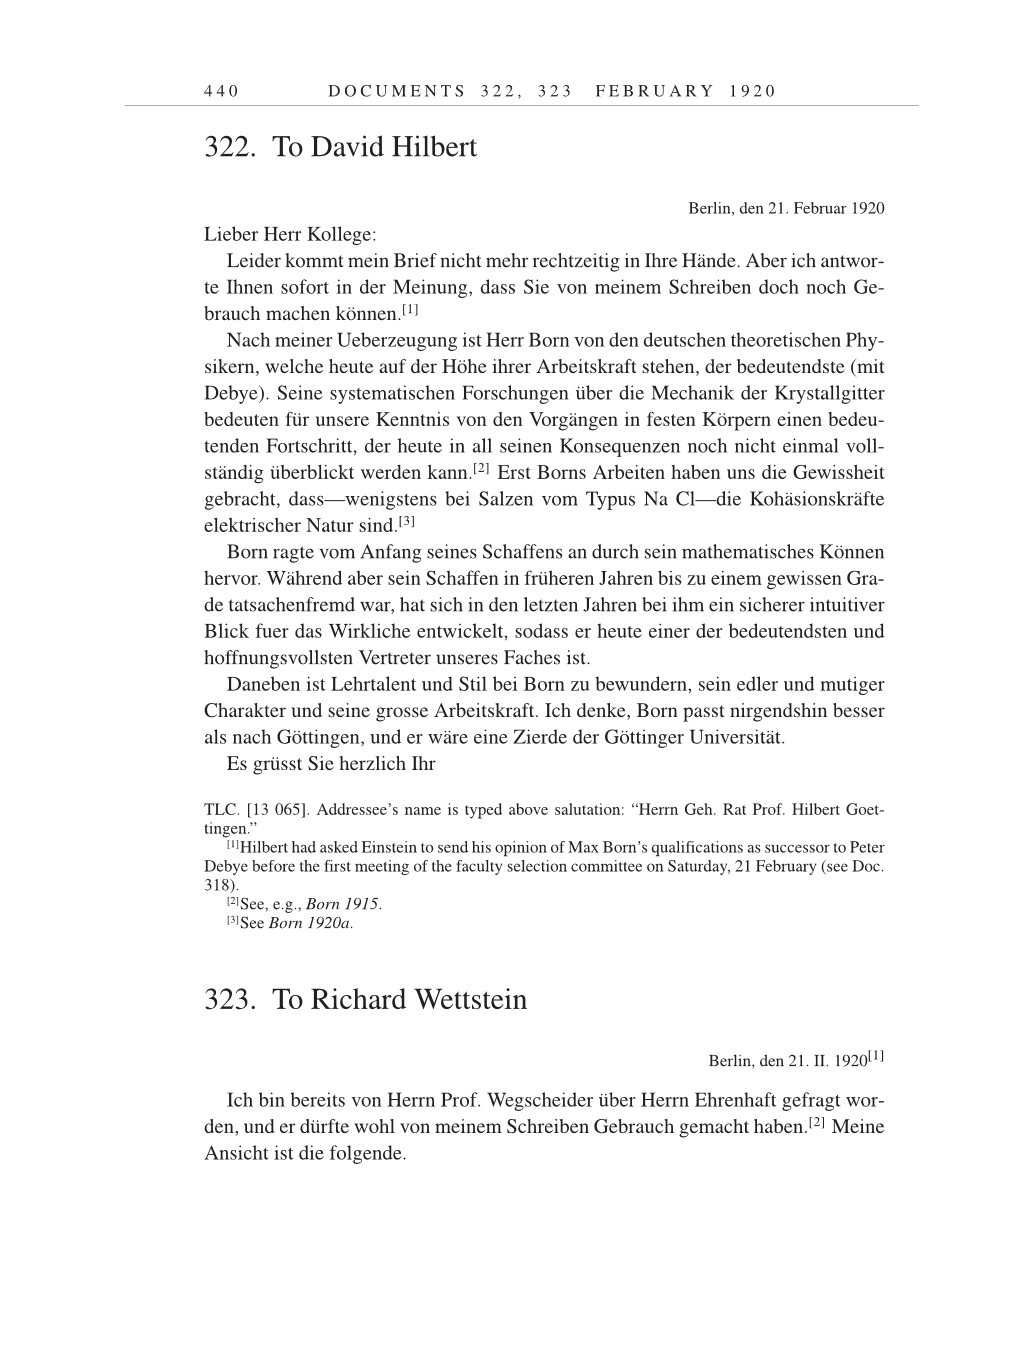 Volume 9: The Berlin Years: Correspondence January 1919-April 1920 page 440